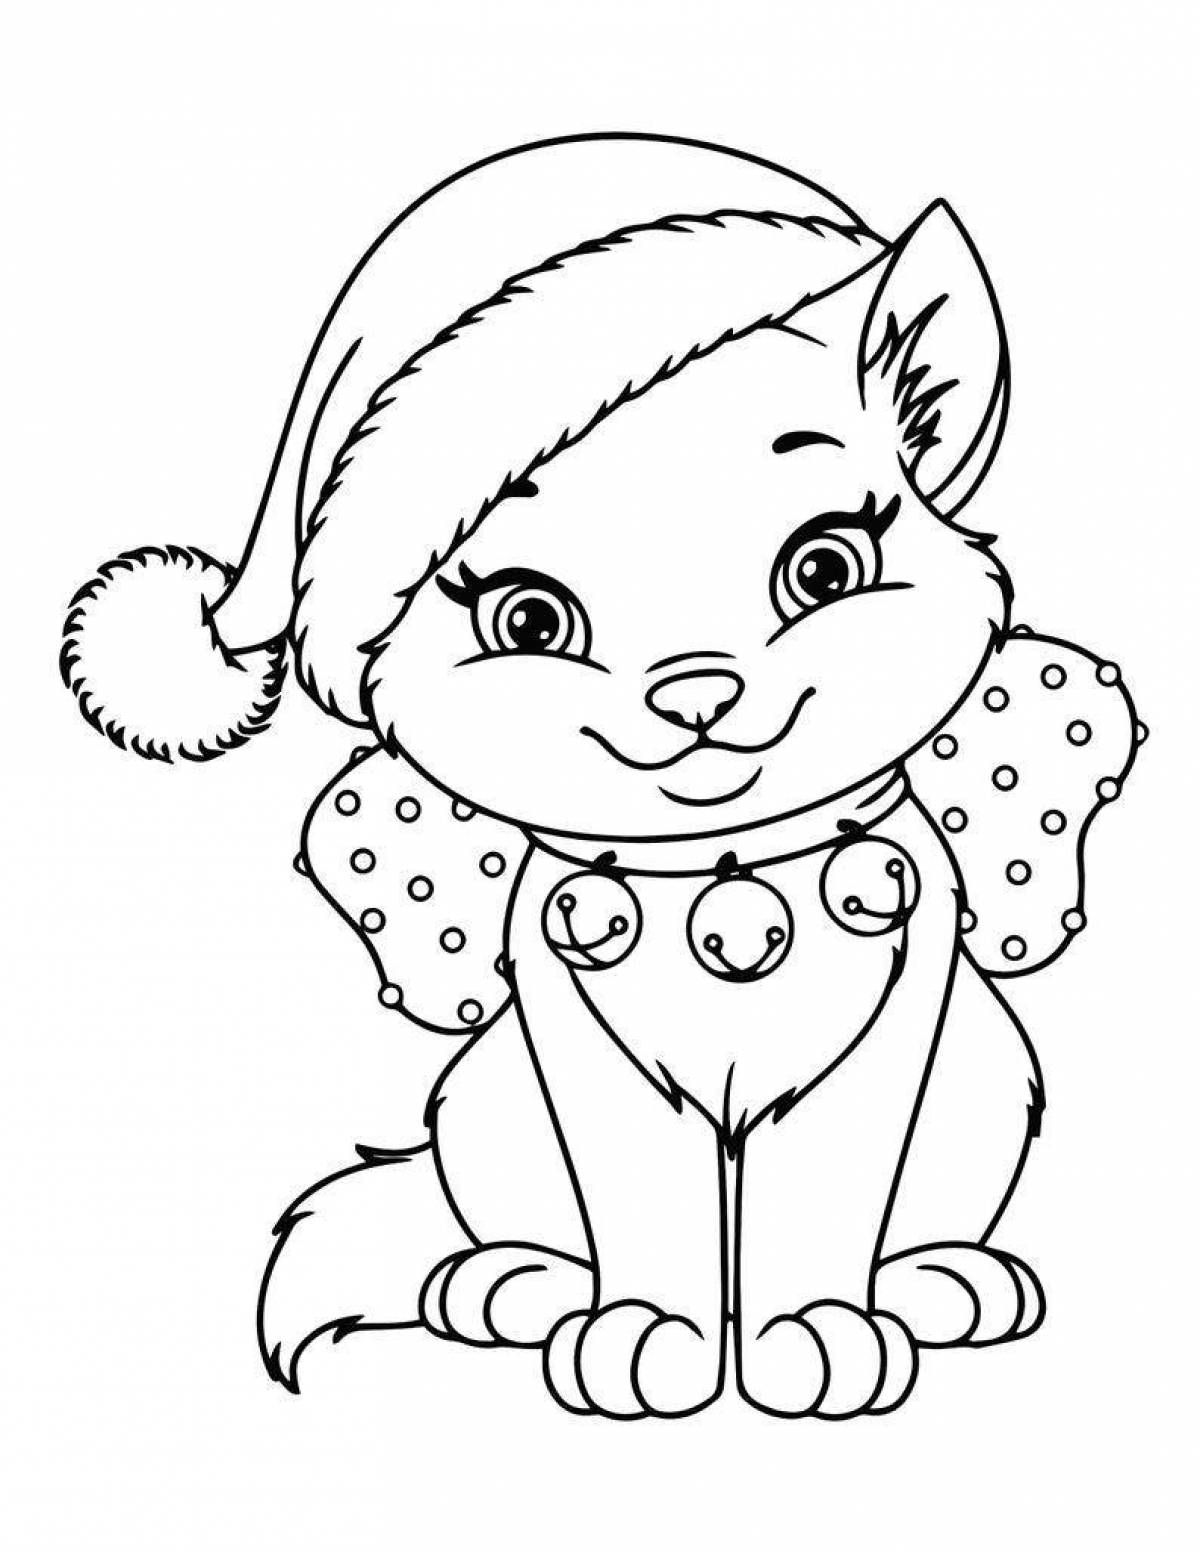 Gorgeous Christmas cat coloring book